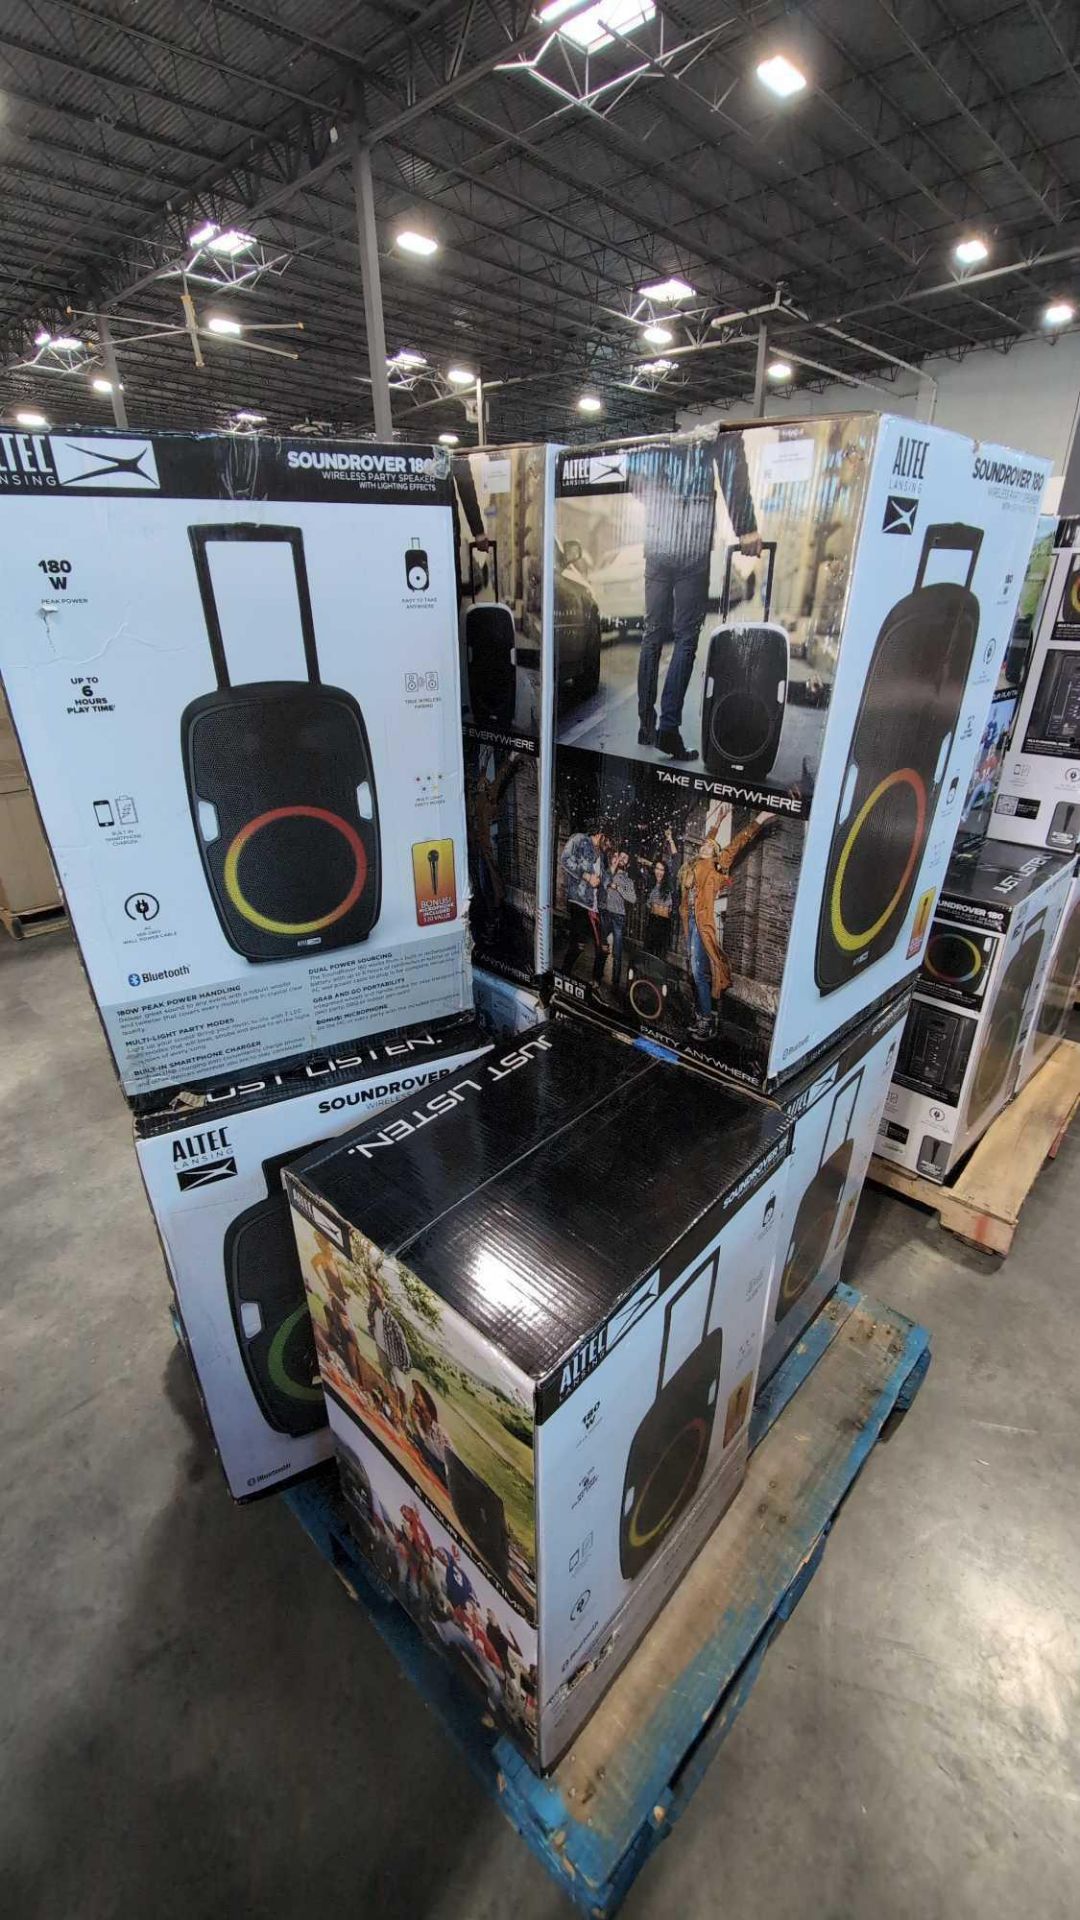 8 Altec Soundrover 180 Party speakers, some returns - Image 3 of 7